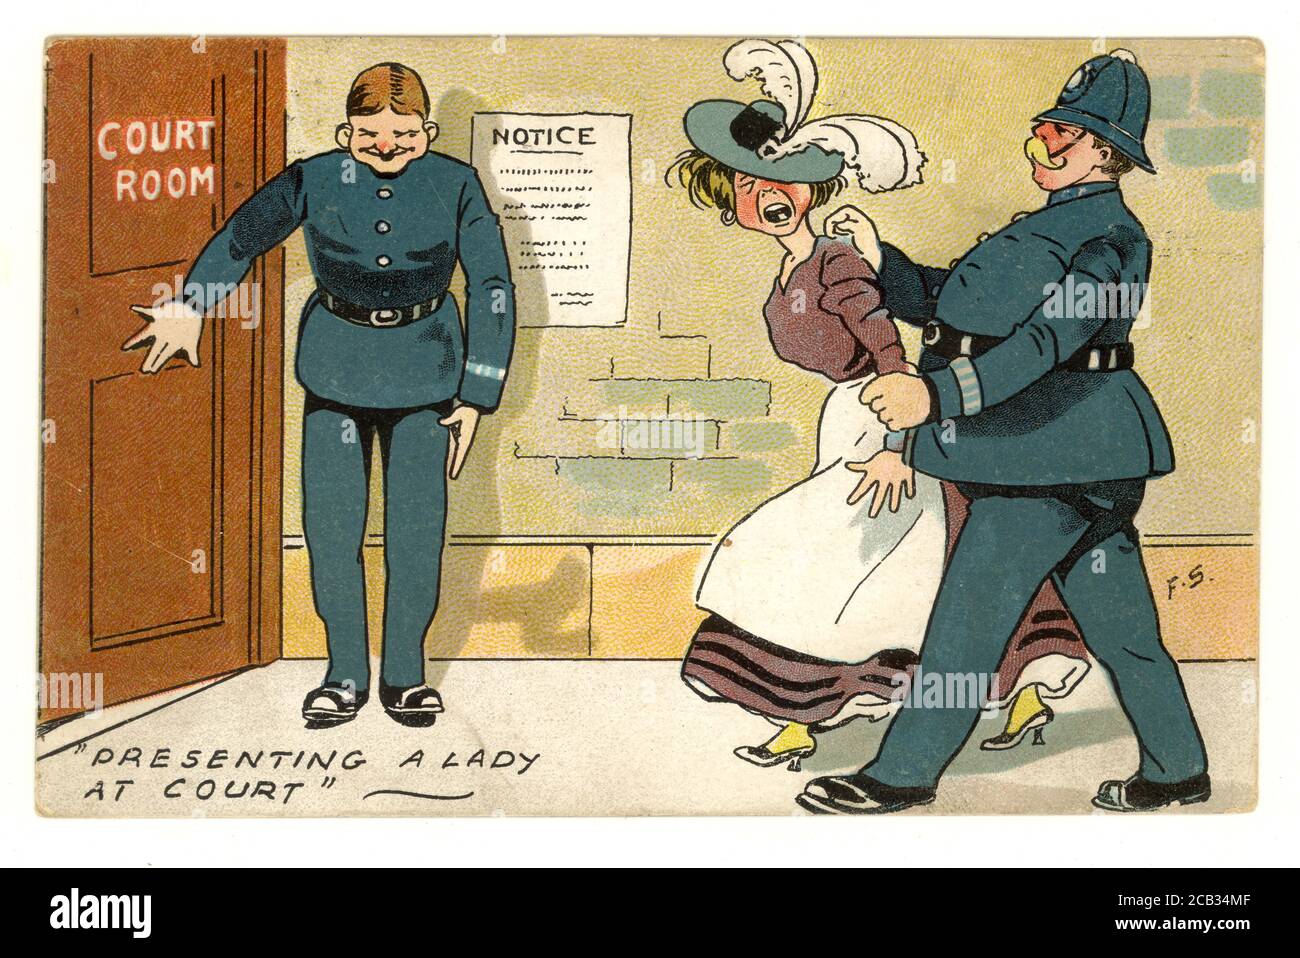 Original early 1900's comic postcard of a militant woman, a suffragette, being taken to court by a policeman, 'presenting a lady at court', posted 31 Aug 1908 U.K. Stock Photo